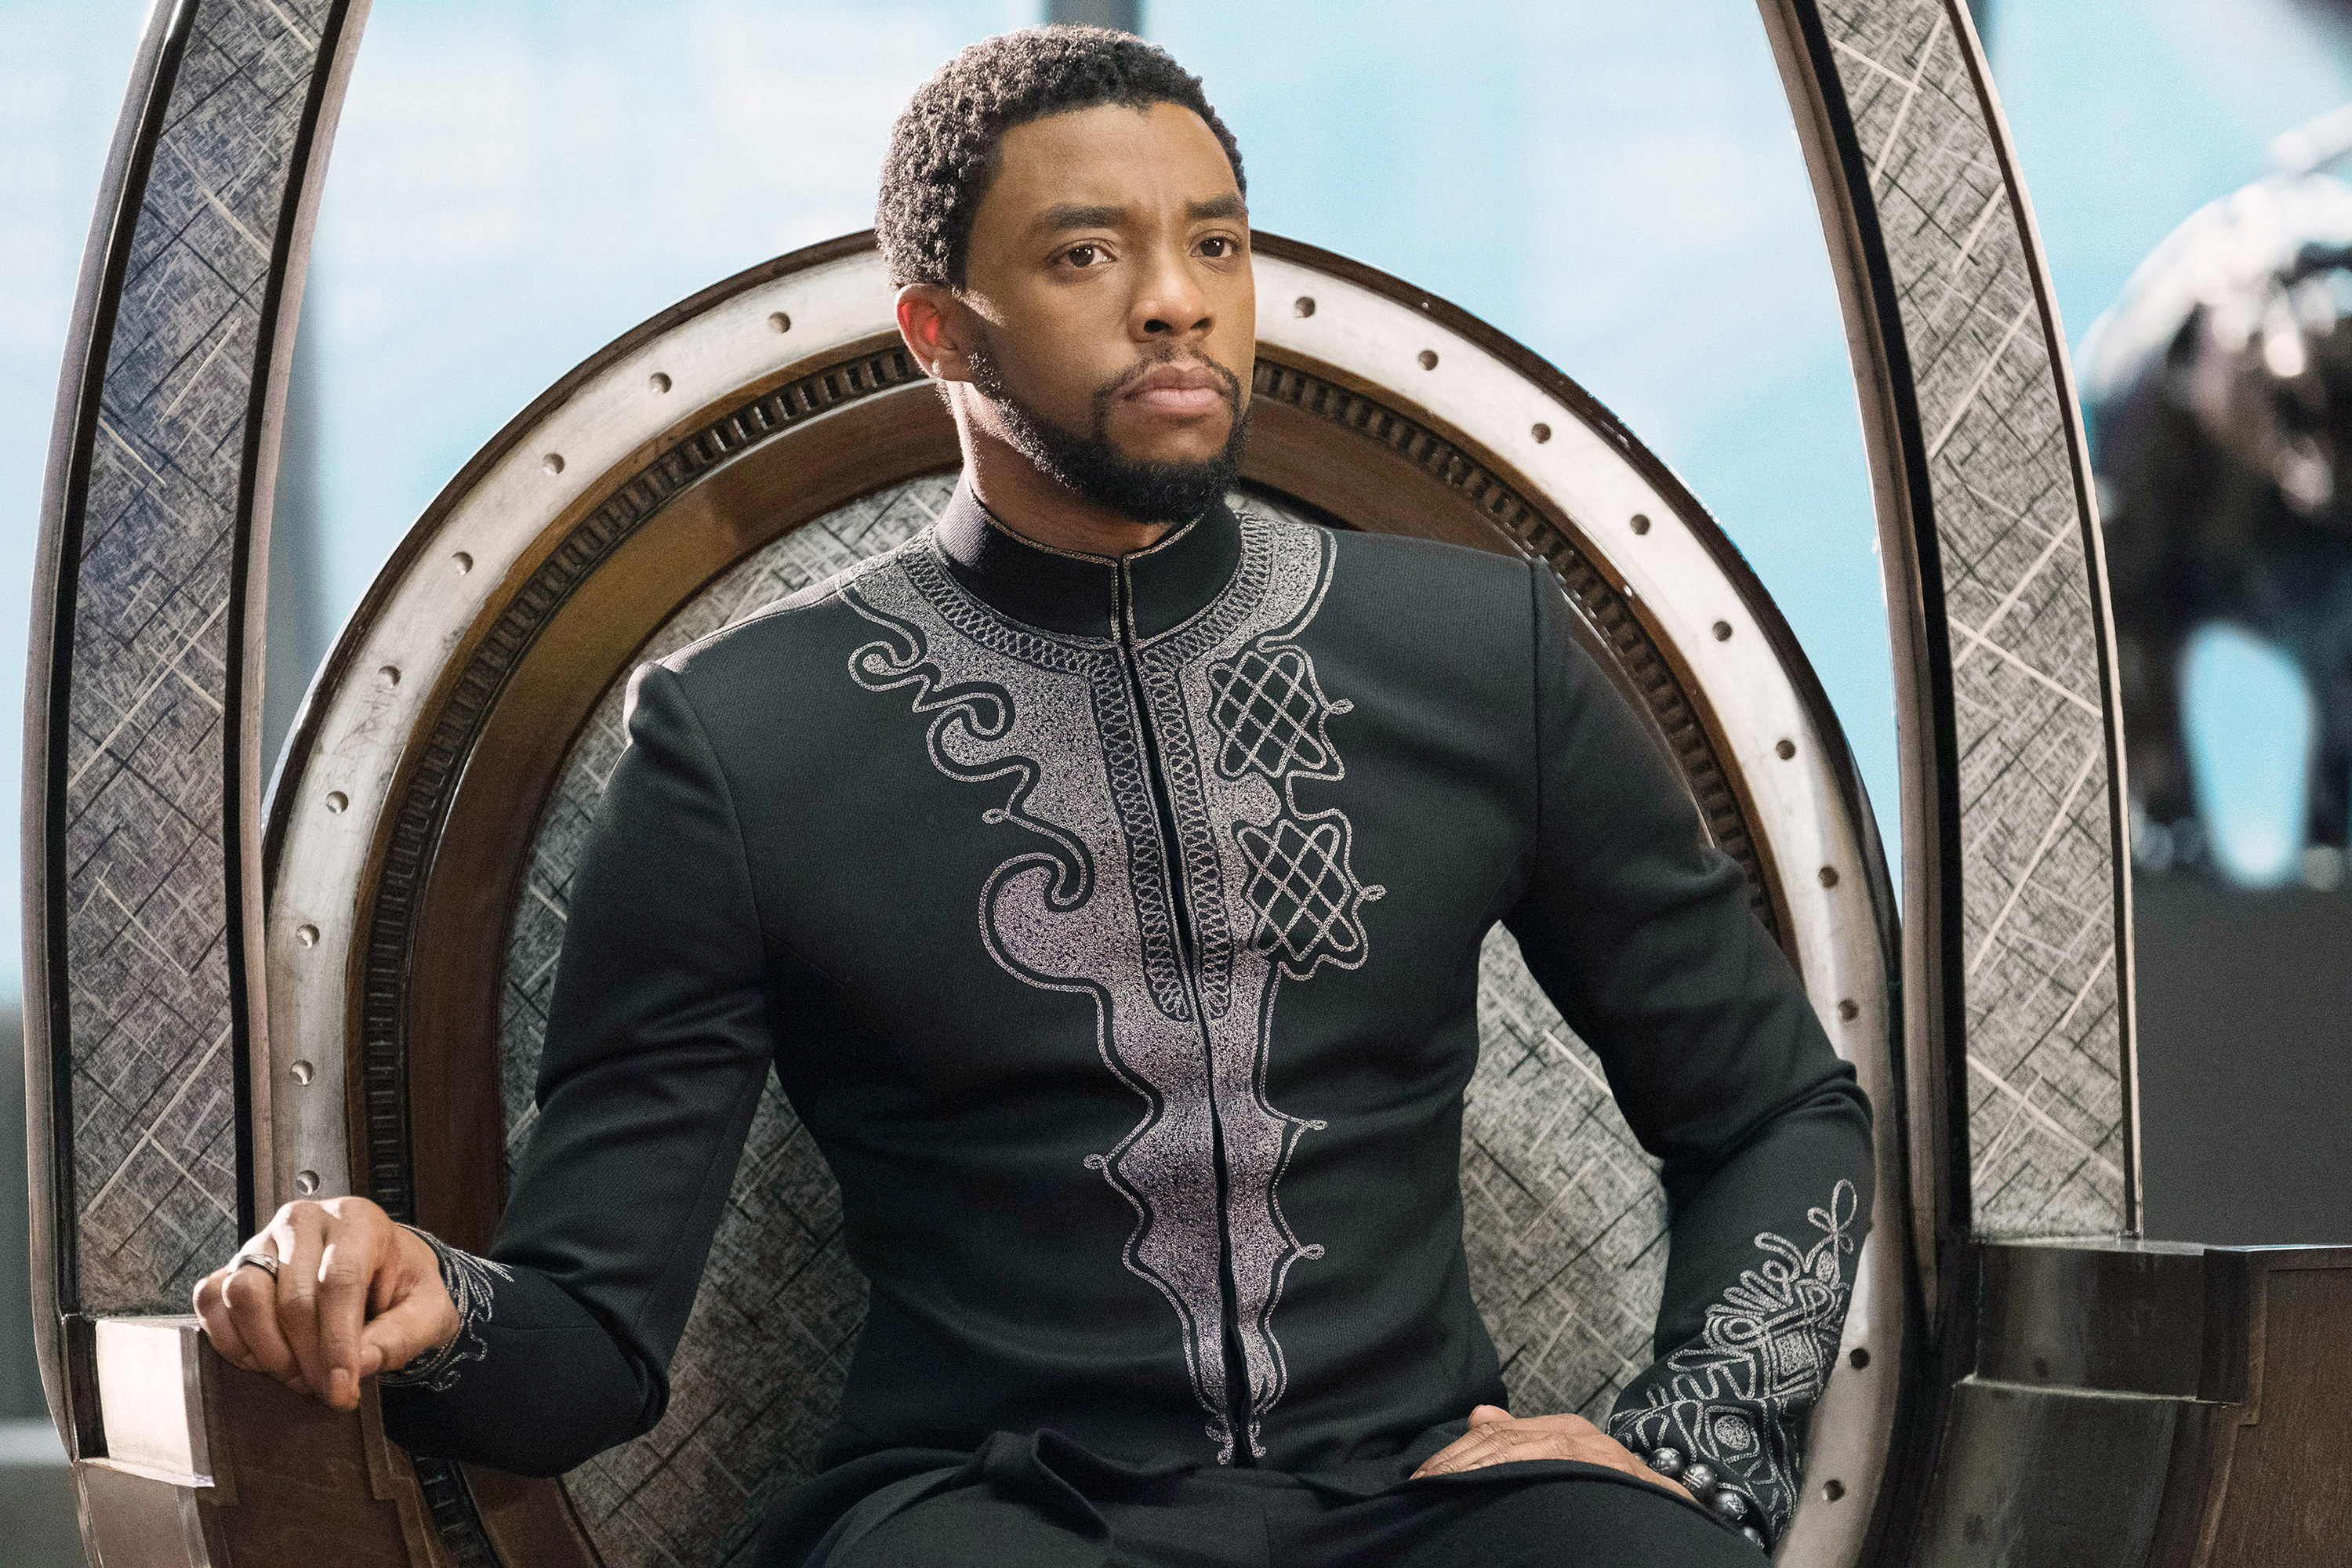 Chadwick sits on a throne in the film